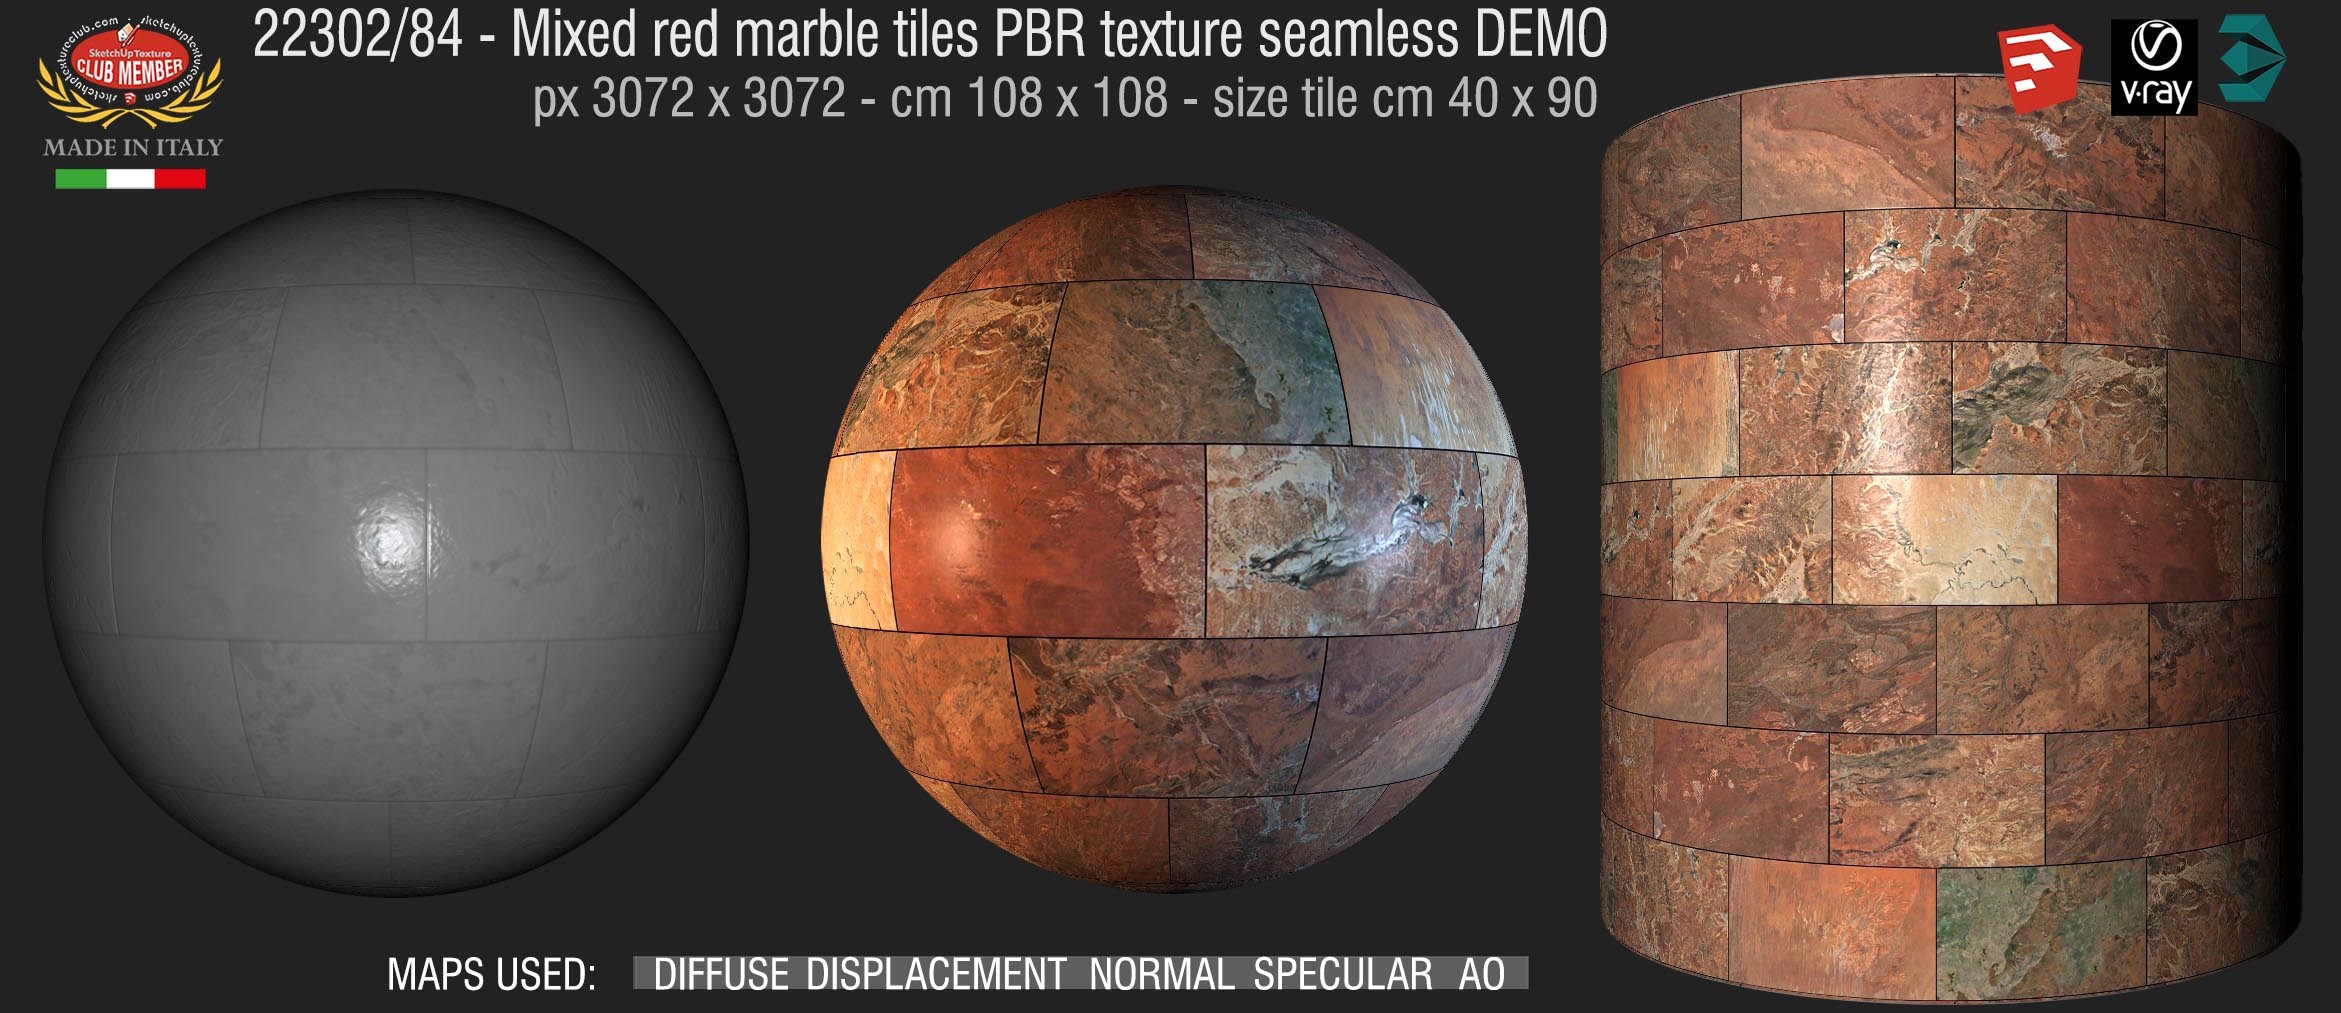 22302_84 Mixed red marble tiles PBR texture seamless DEMO